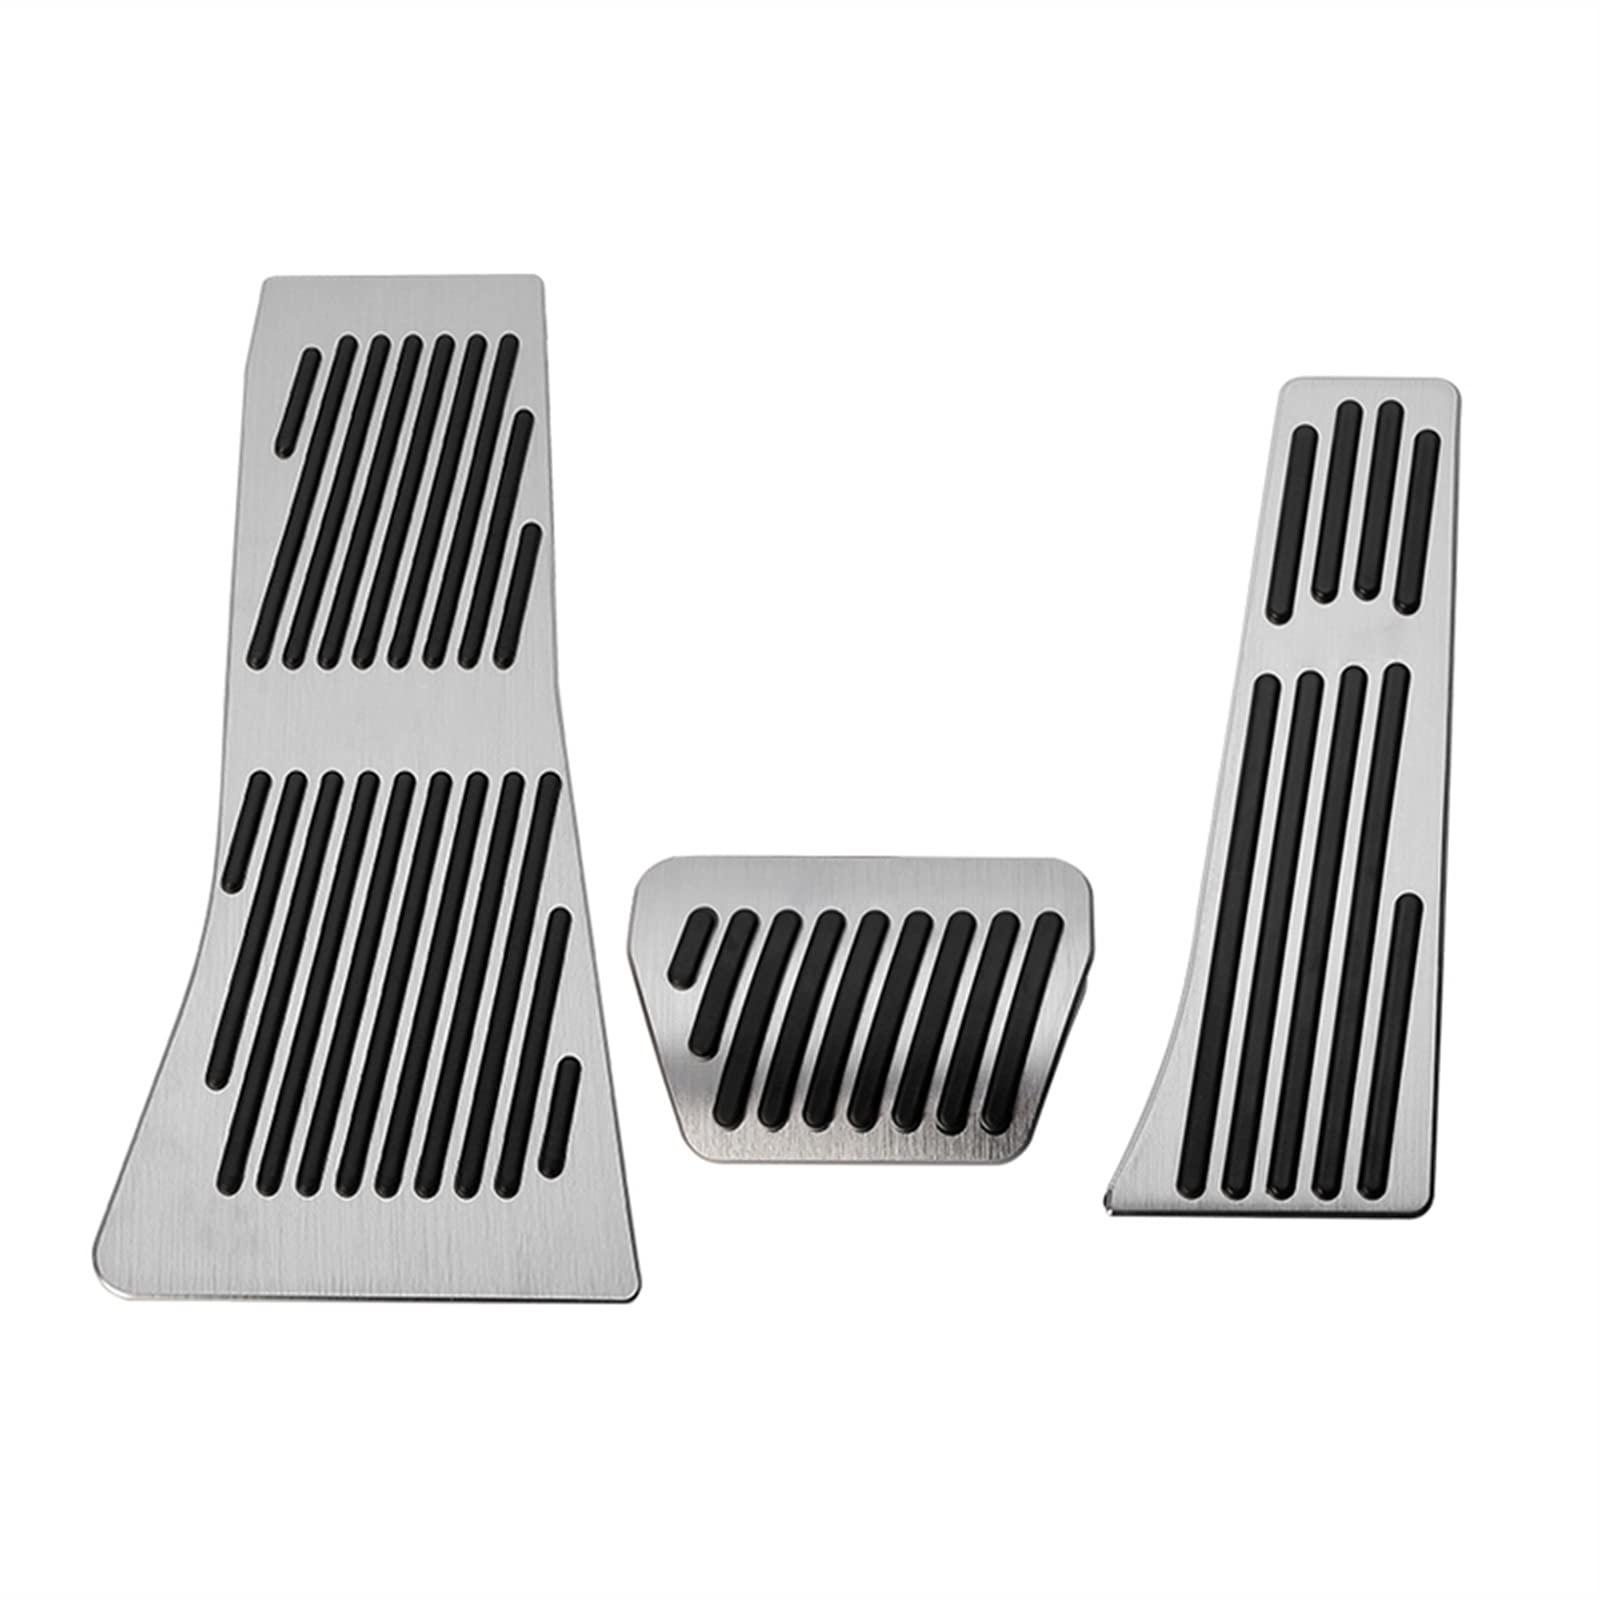 RIXENT Aluminium Auto Fußpedal Pad Kraftstoff Gaspedal Bremspedal Rest Pedal Abdeckung, for BMW, for X5 X6 E70 E71 E72 F15 F16 F85 F86 Fußpedalauflage(Footrest AT 3pcs) von RIXENT